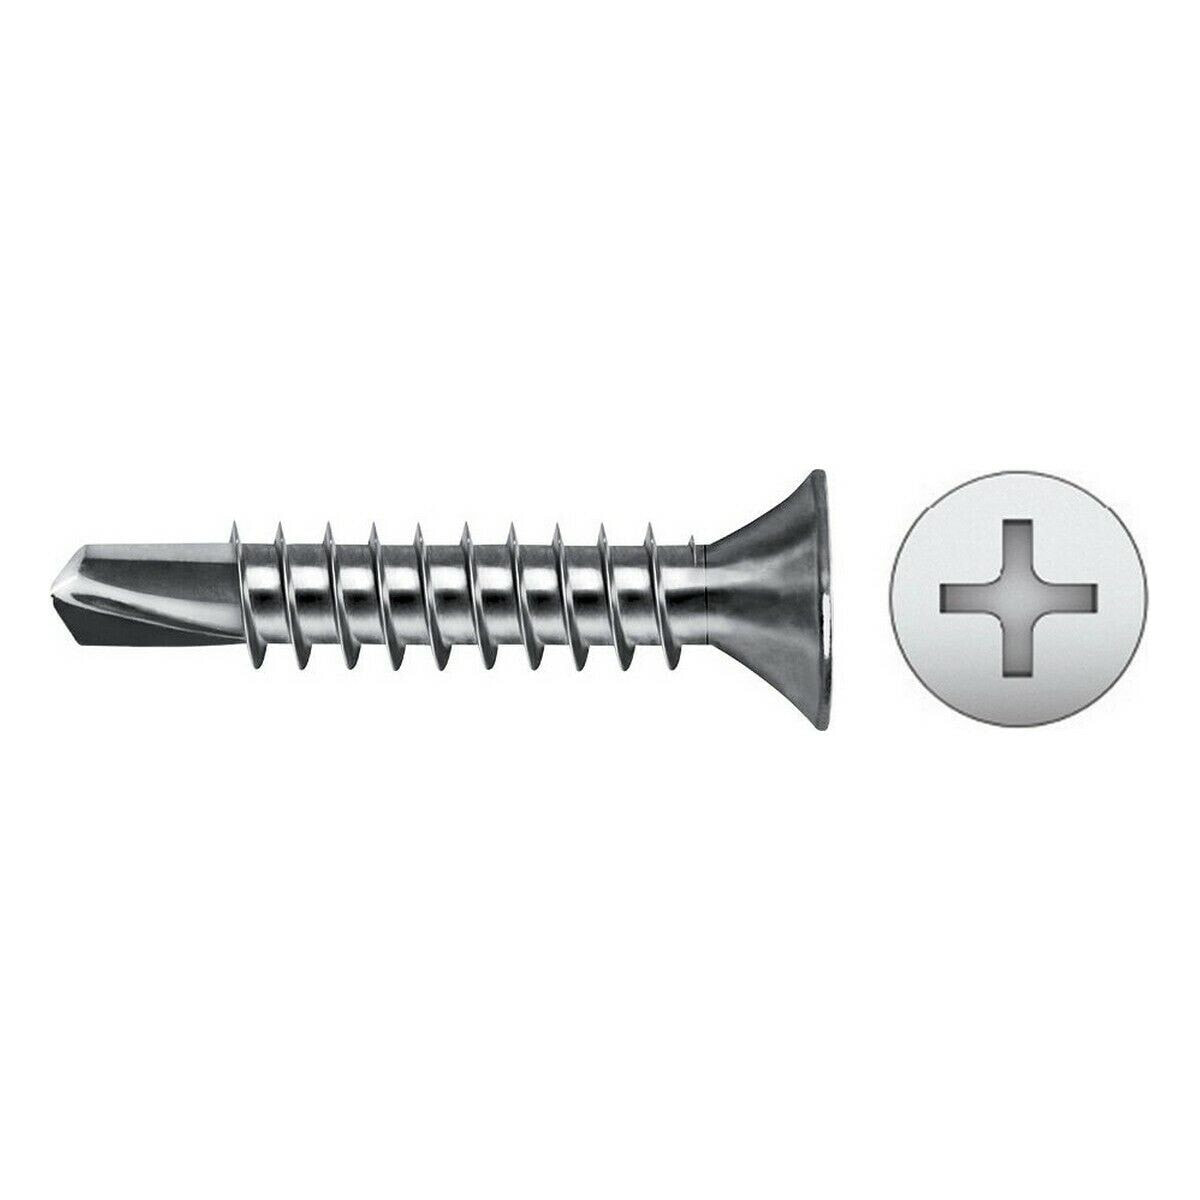 Self-tapping screw CELO 3,9 x 32 mm 250 Units Galvanised countersunk